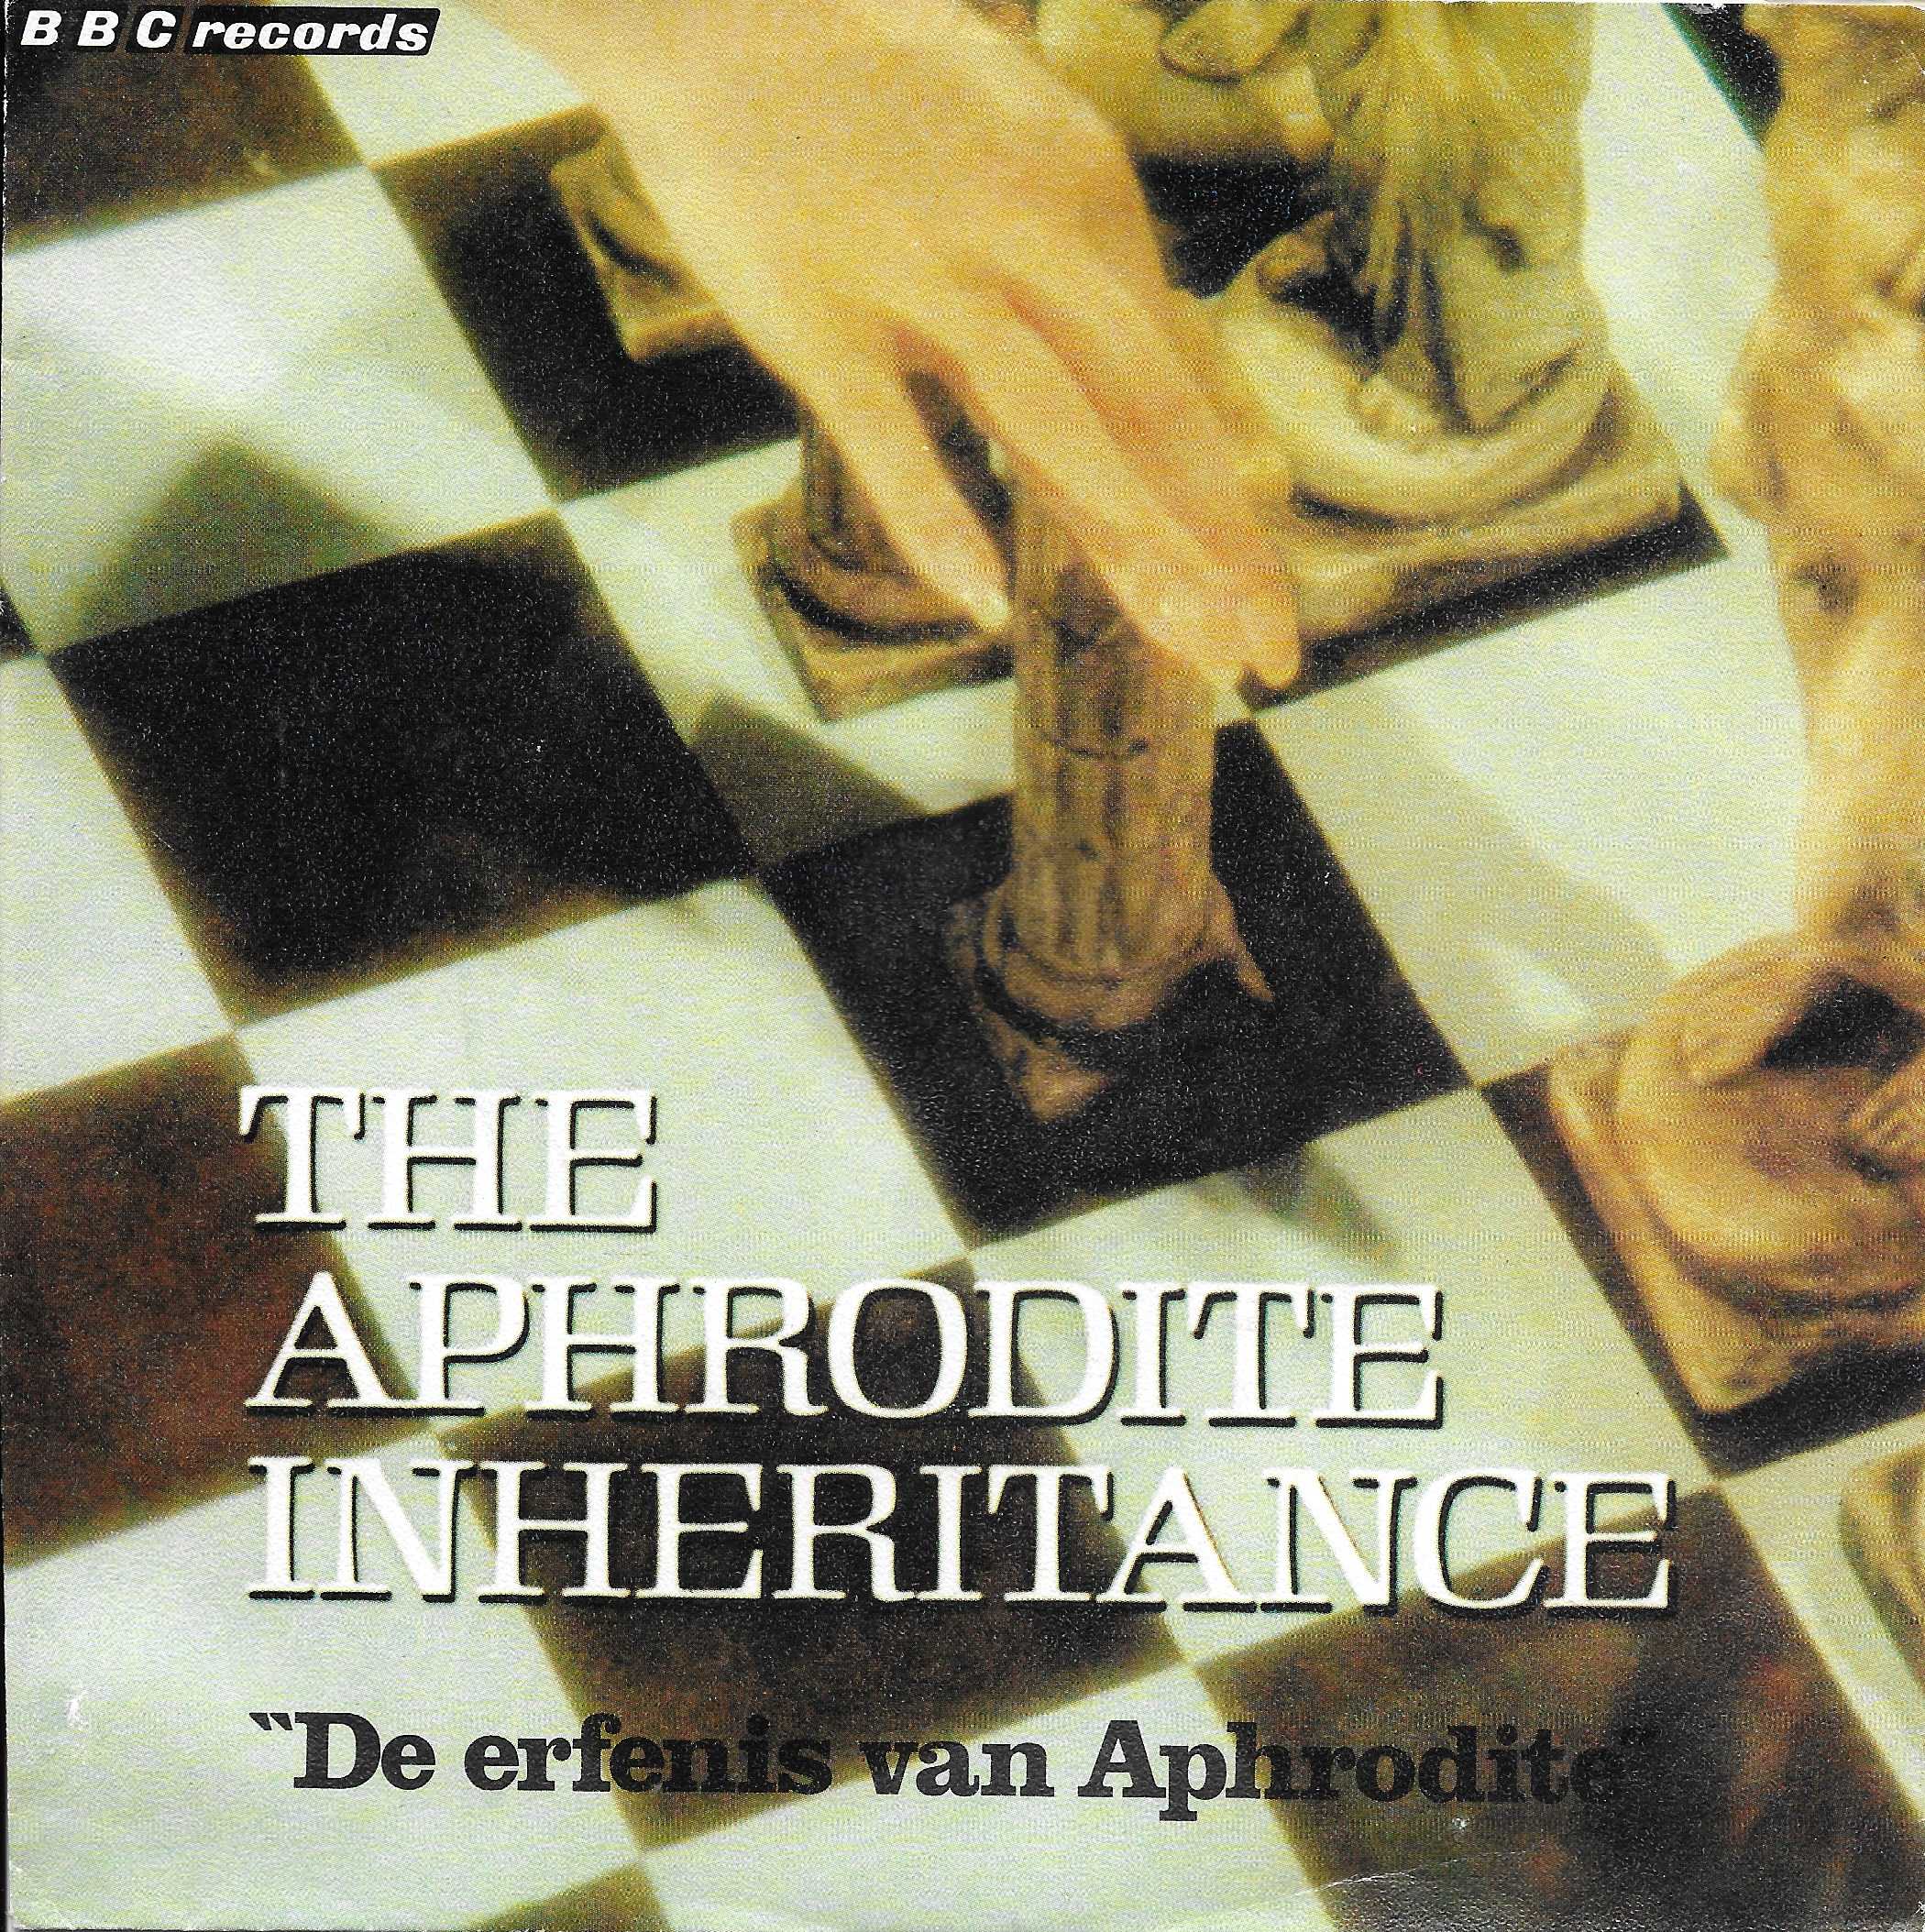 Picture of The Aphrodite inheritance by artist George Kotsonis from the BBC singles - Records and Tapes library